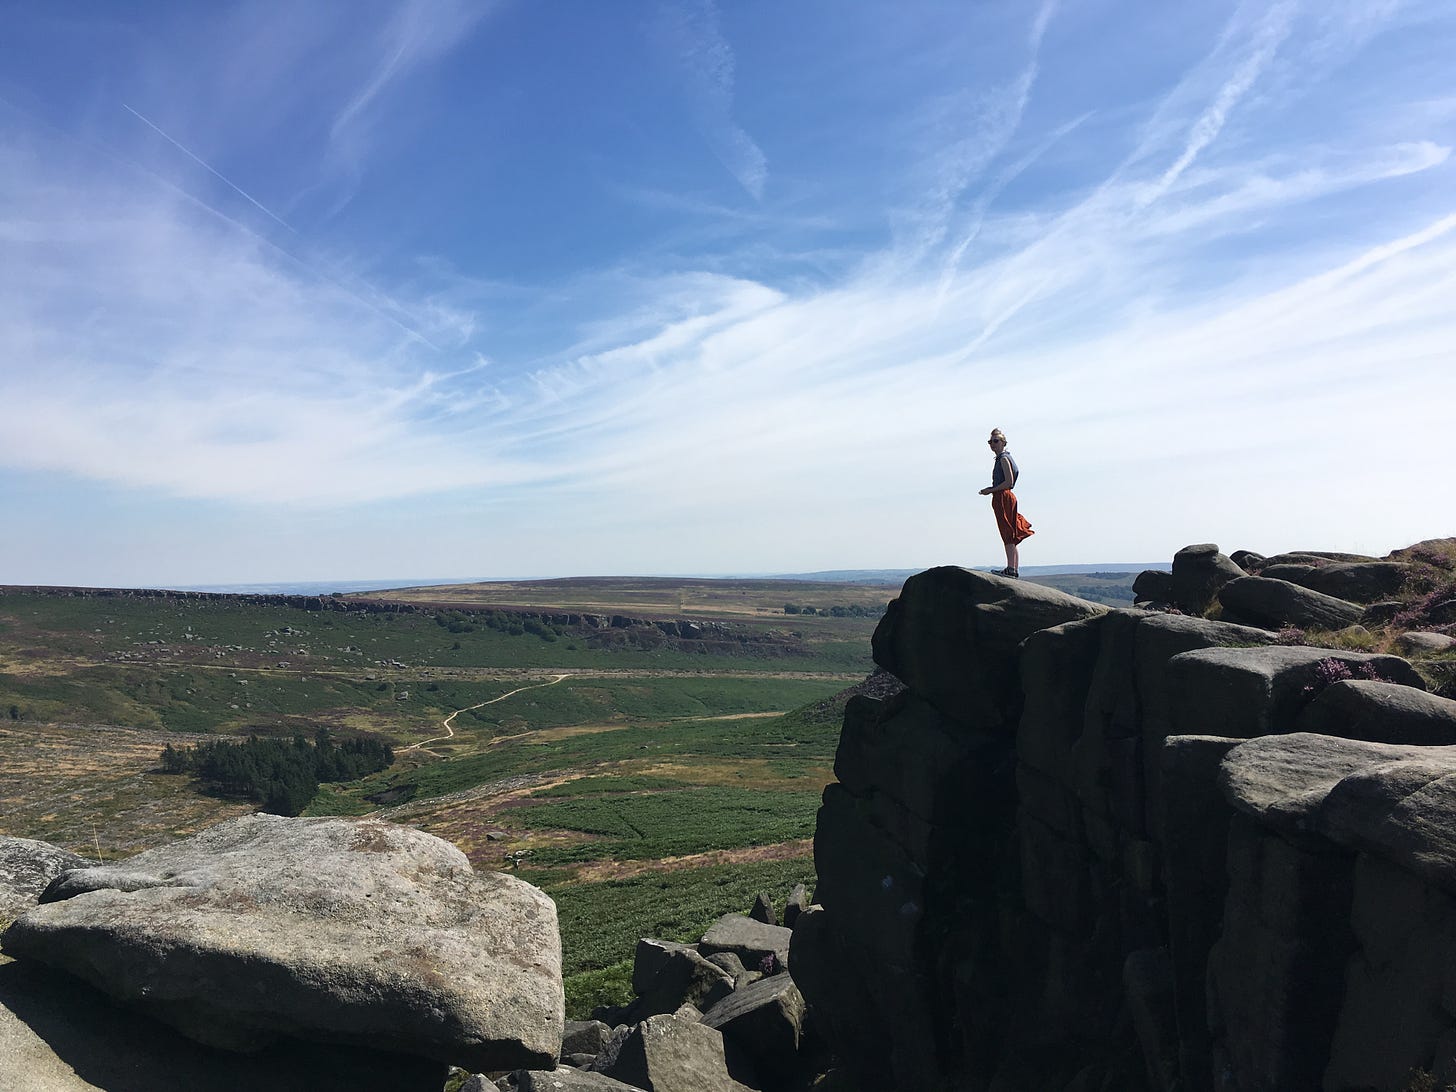 A wide expanse of sky and a flat plain below. in the foreground, large rocks rise up and a young woman in a billowing skirt stands on the edge.